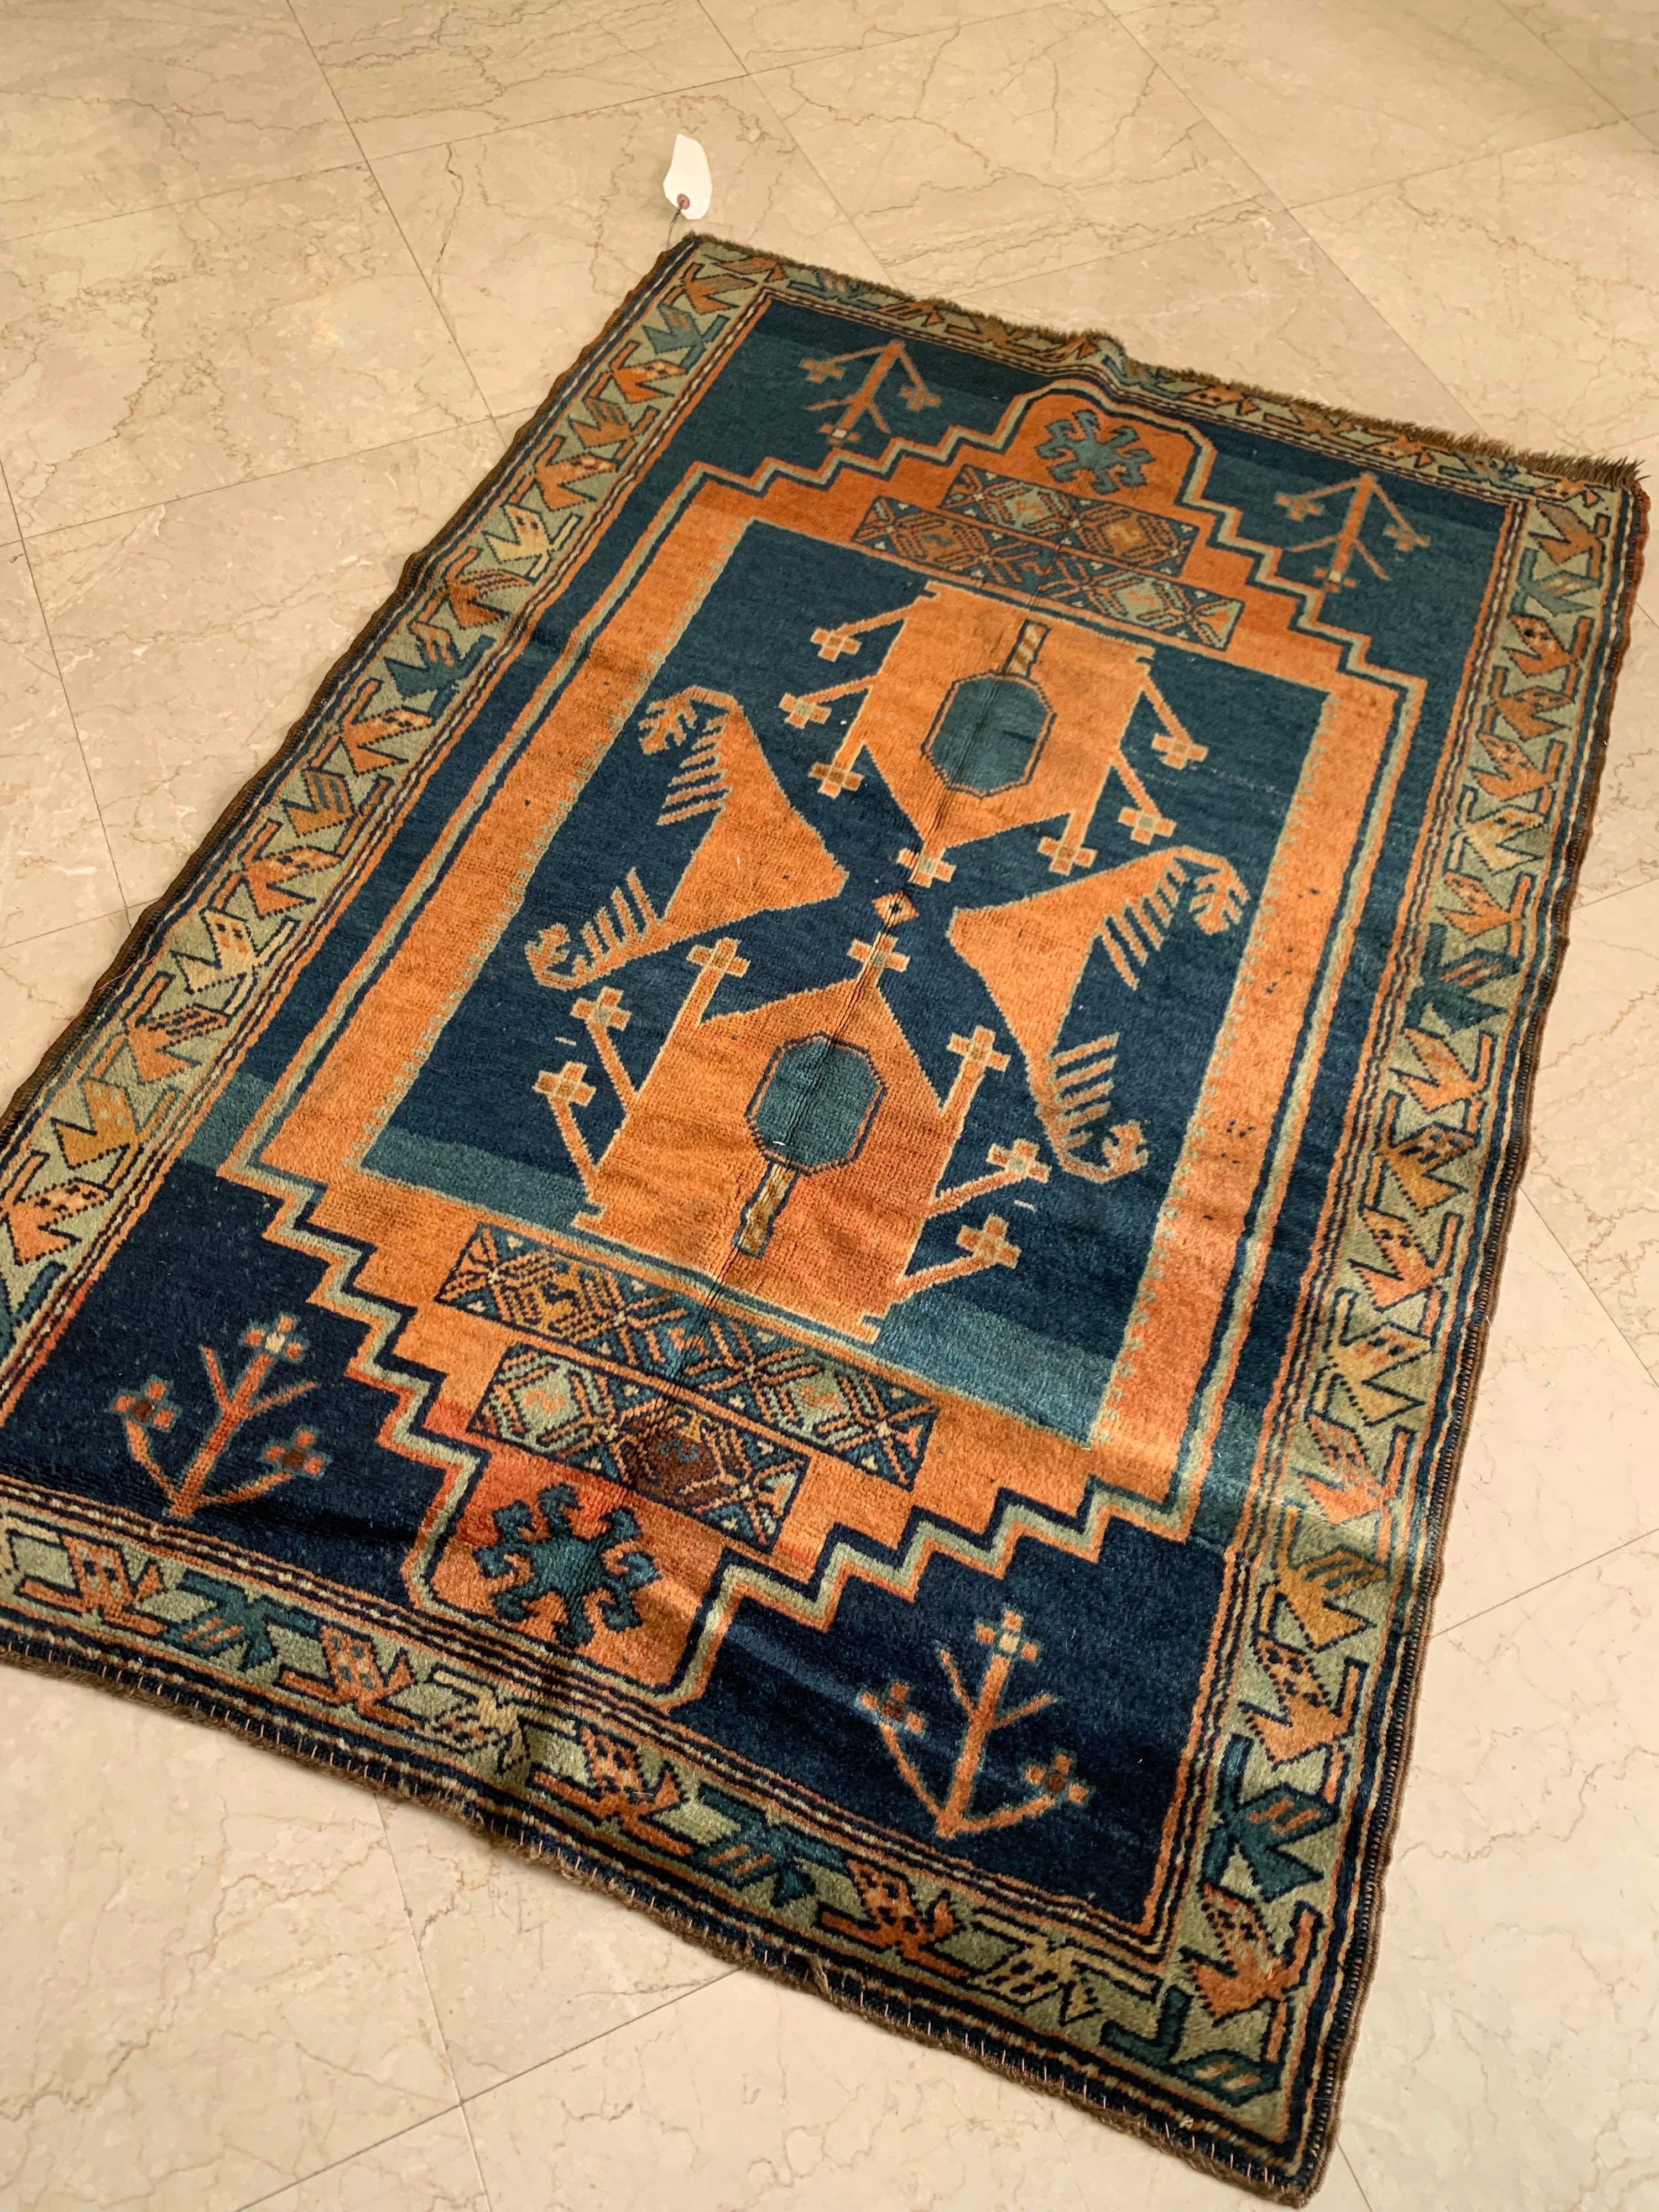 This is a lovely antique Caucasian orange and blue brown Kazak Tribal Geometric rug circa 1920-1930 measuring 3.2 x 4.5 ft.